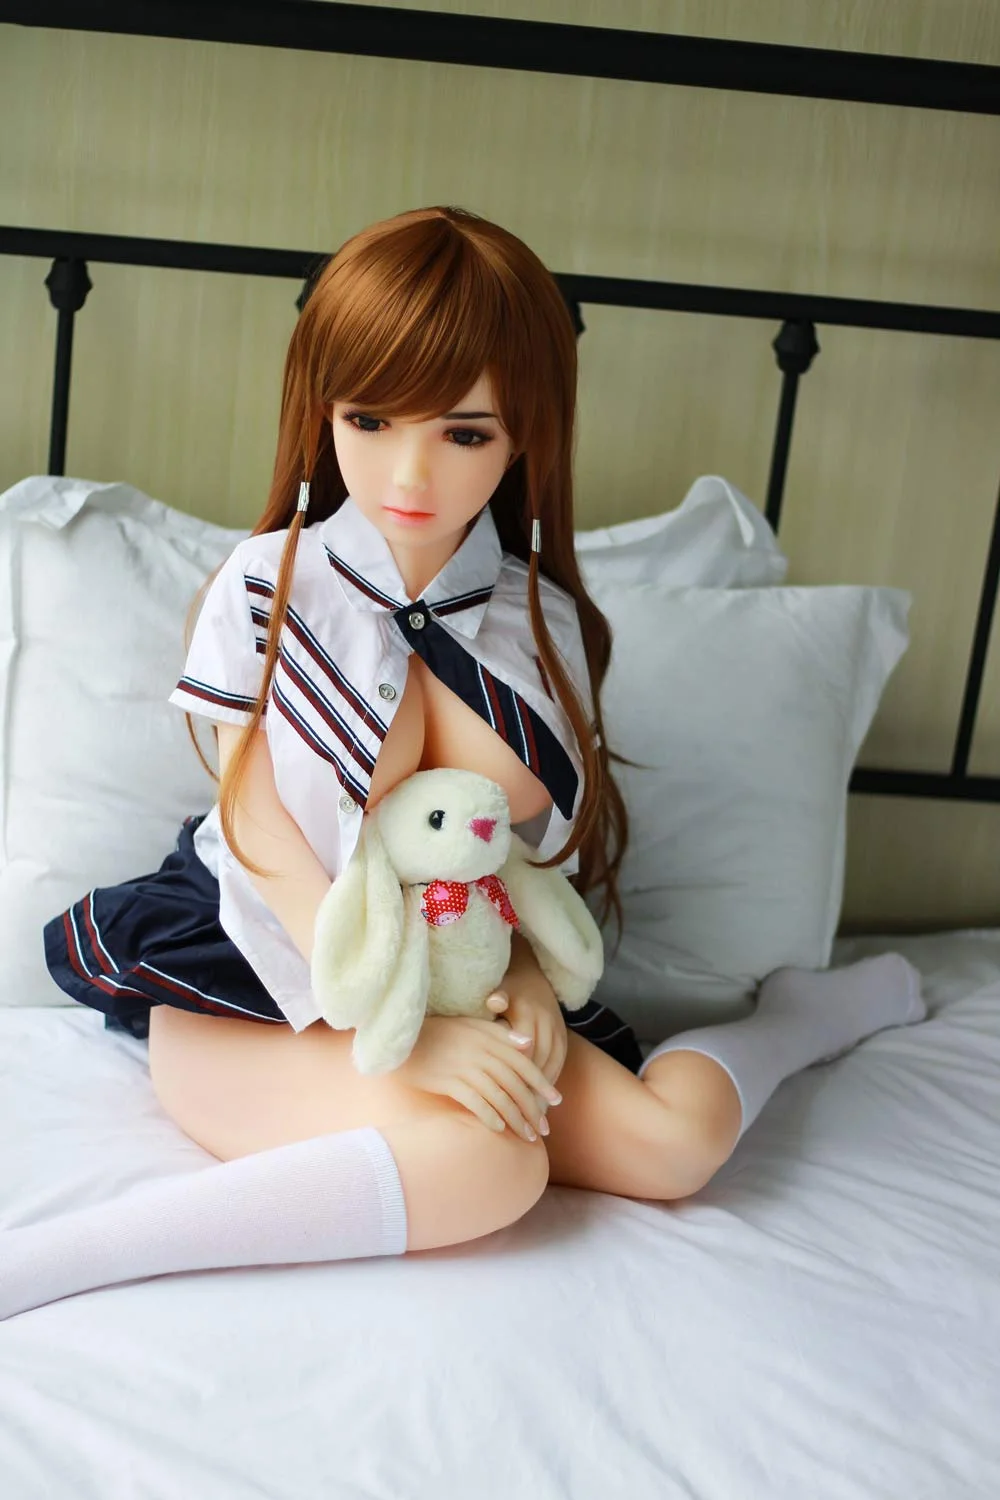 Mini sex doll sitting with legs crossed